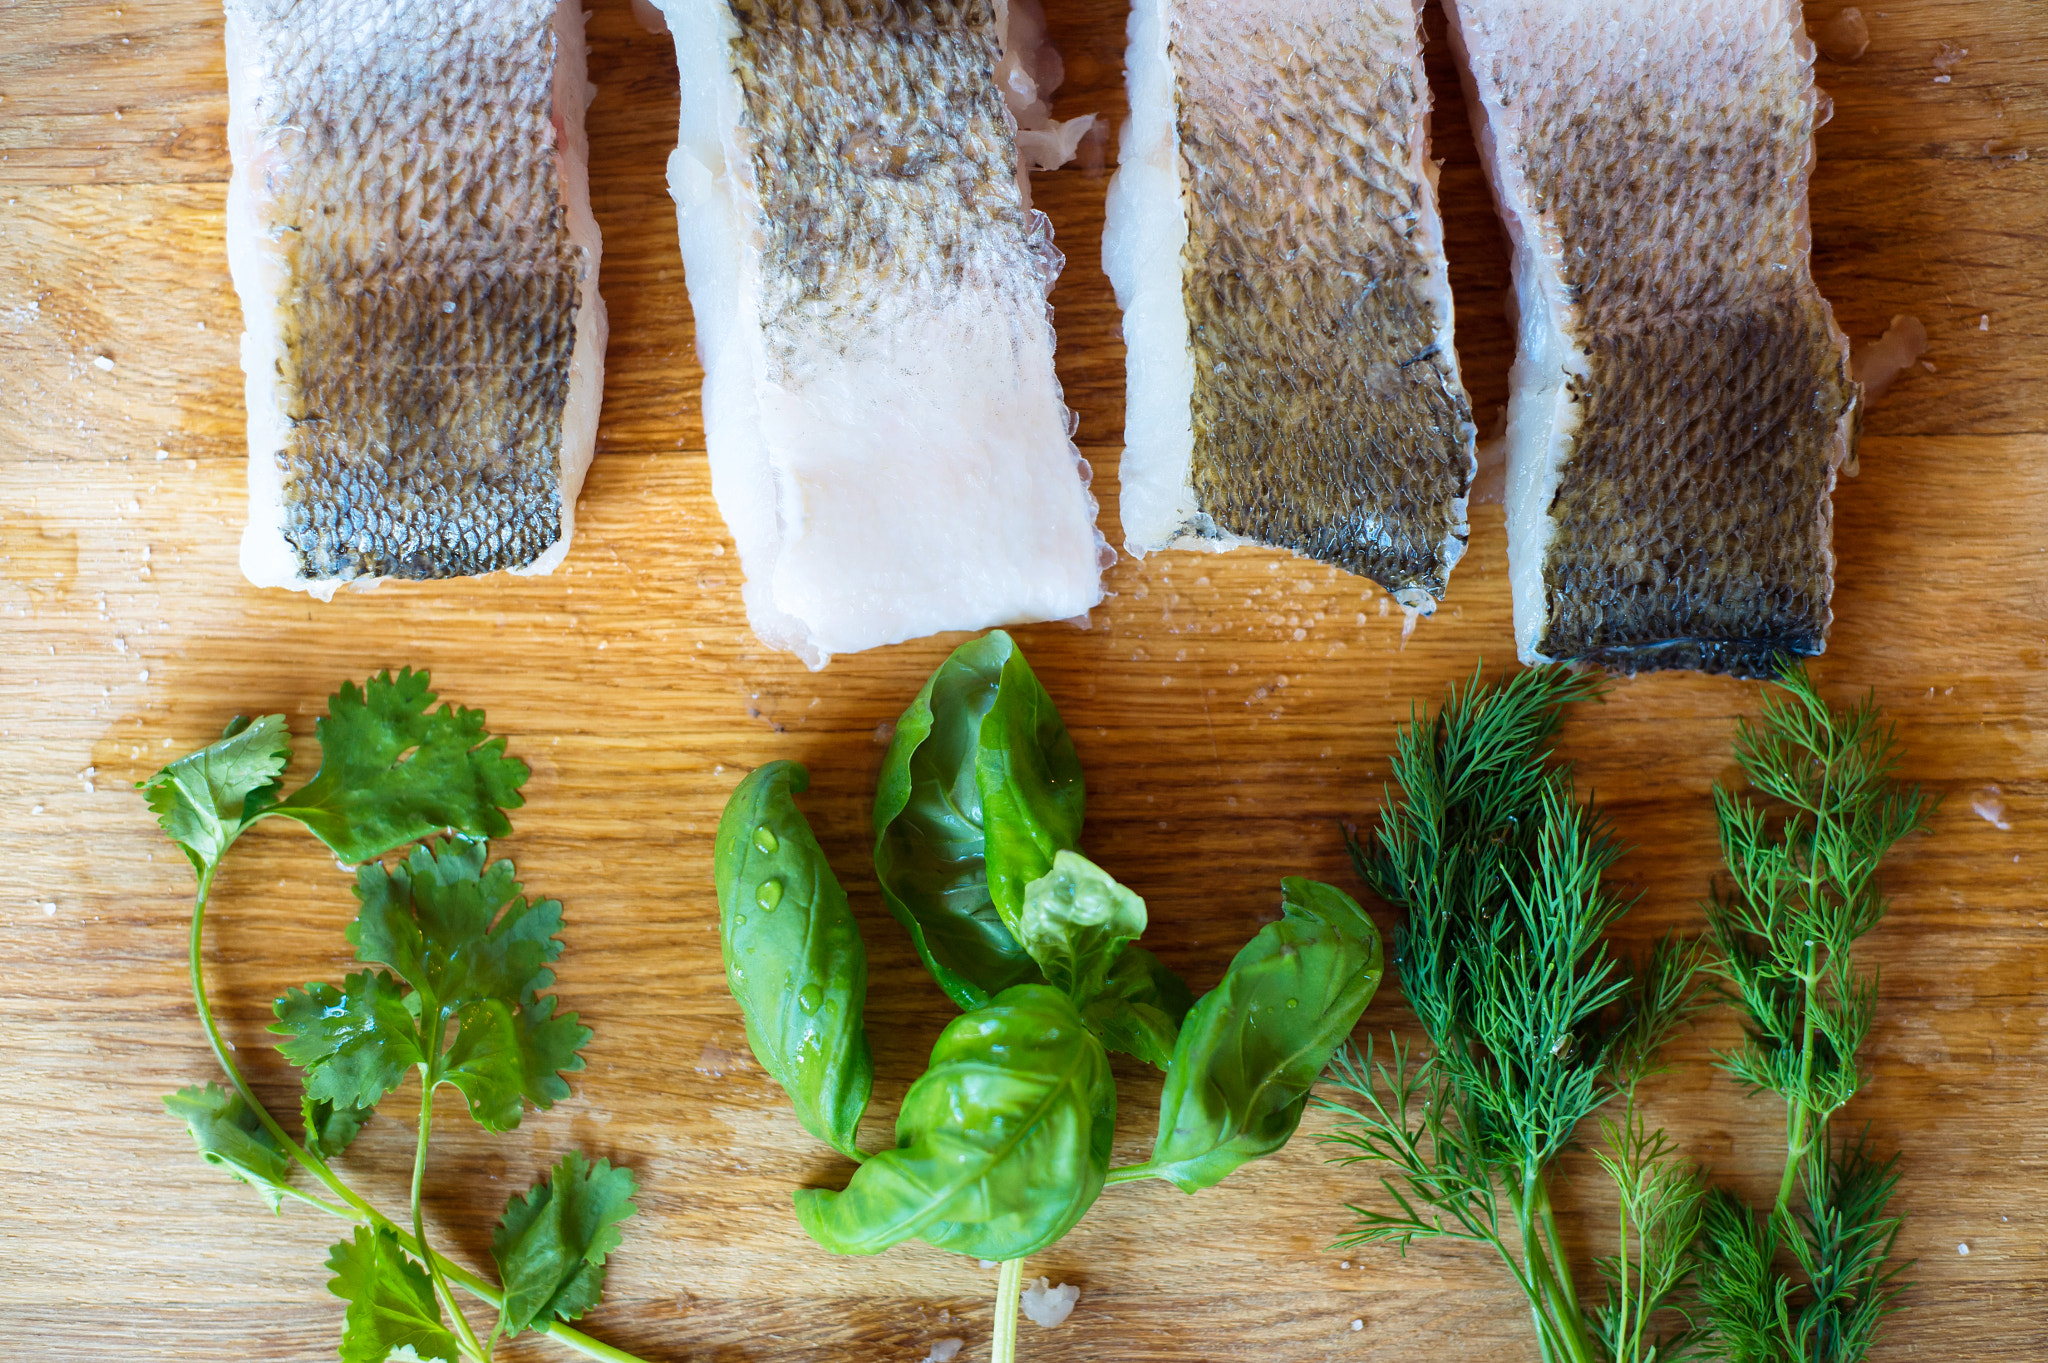 Nikon D4S sample photo. Raw zander fish fillets with various herbs, wooden background. photography